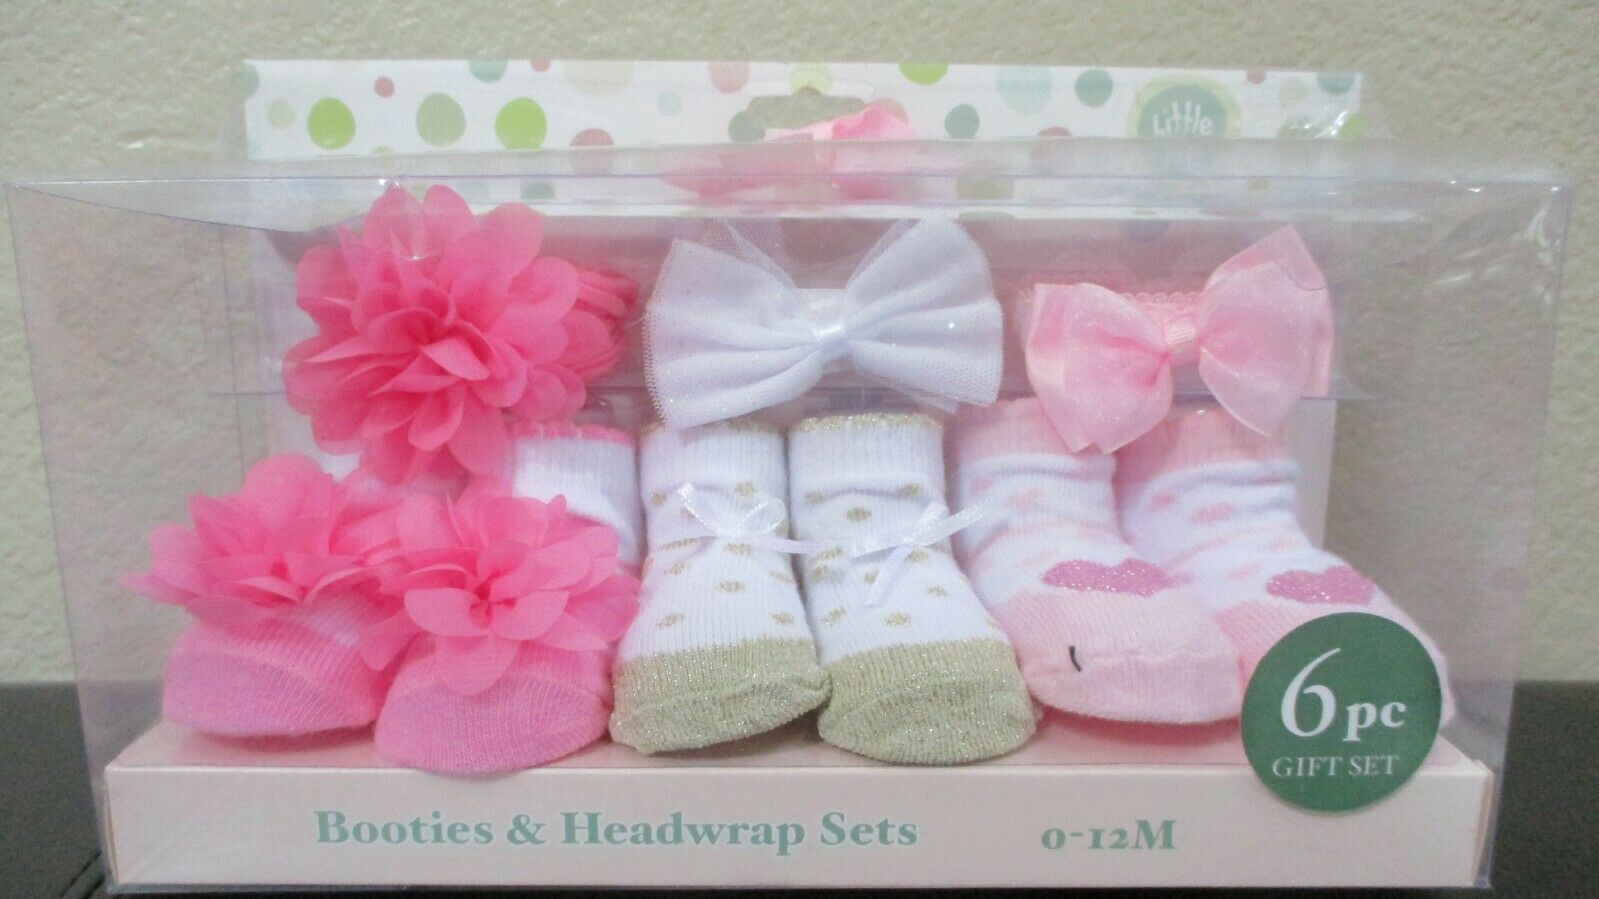 Little Me Booties & Headwrap Sets 1-12 Months 6 Pc Gift Set Pinks NEW - $15.14